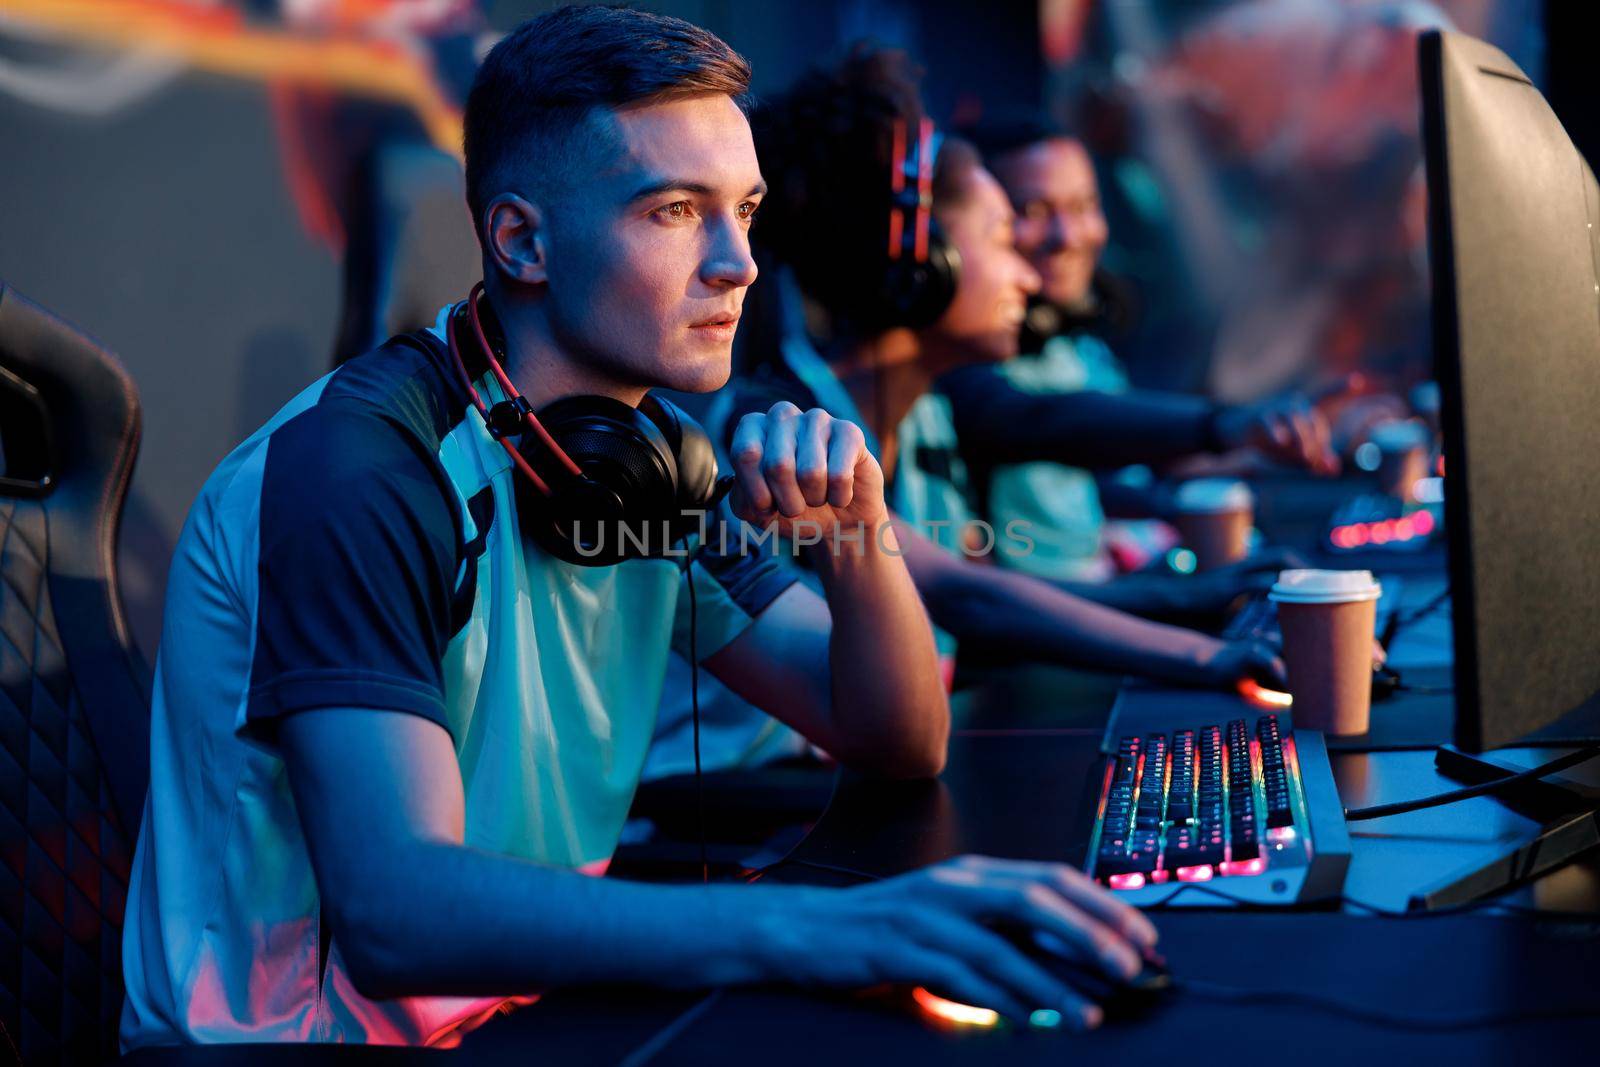 Horizontal shot of concentrated young gamer with headset playing in multiplayer video game on PC in gaming club